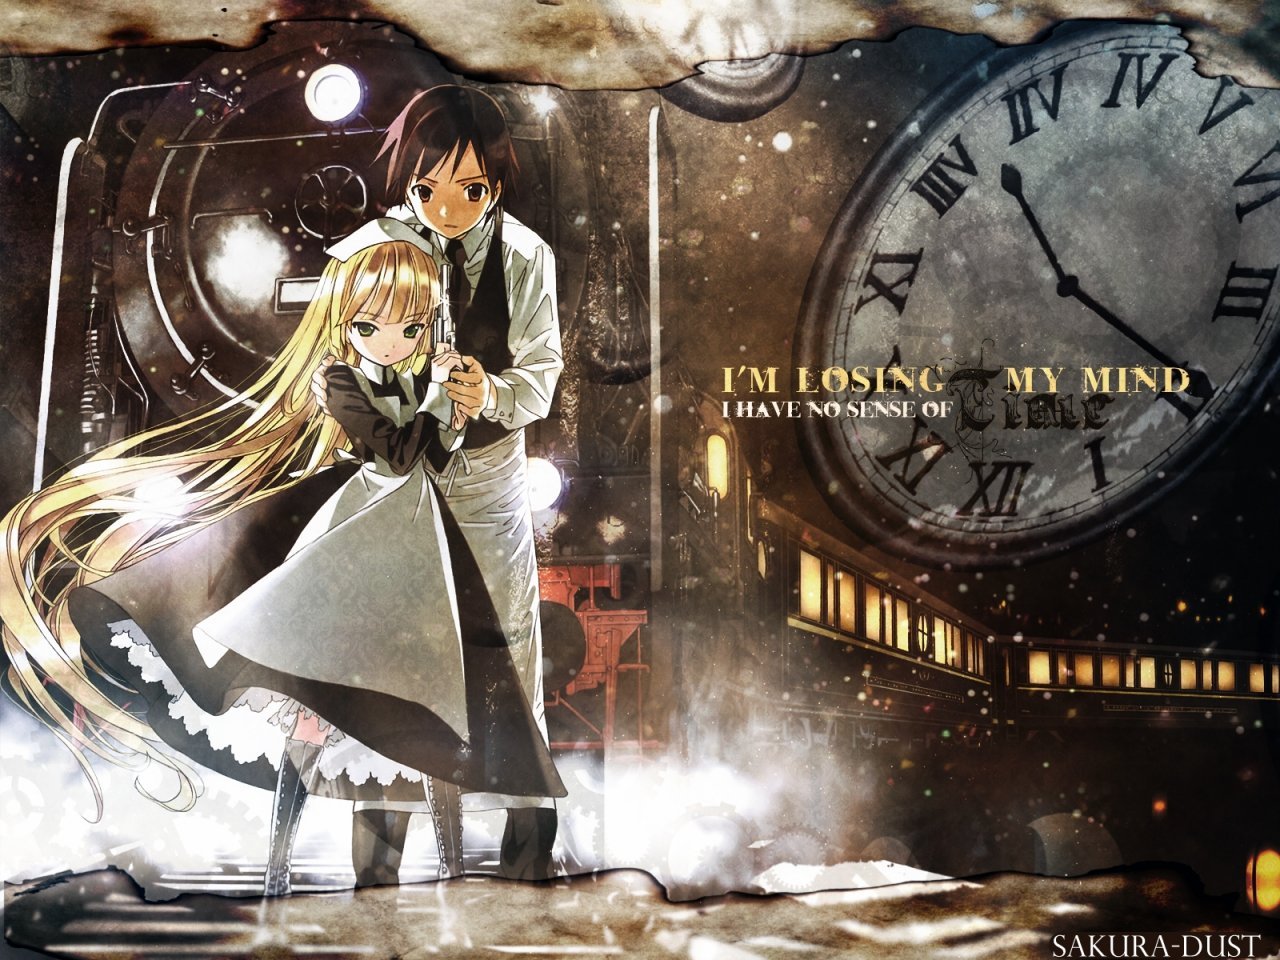 Gosick images Gosick HD wallpaper and background photos 26104907